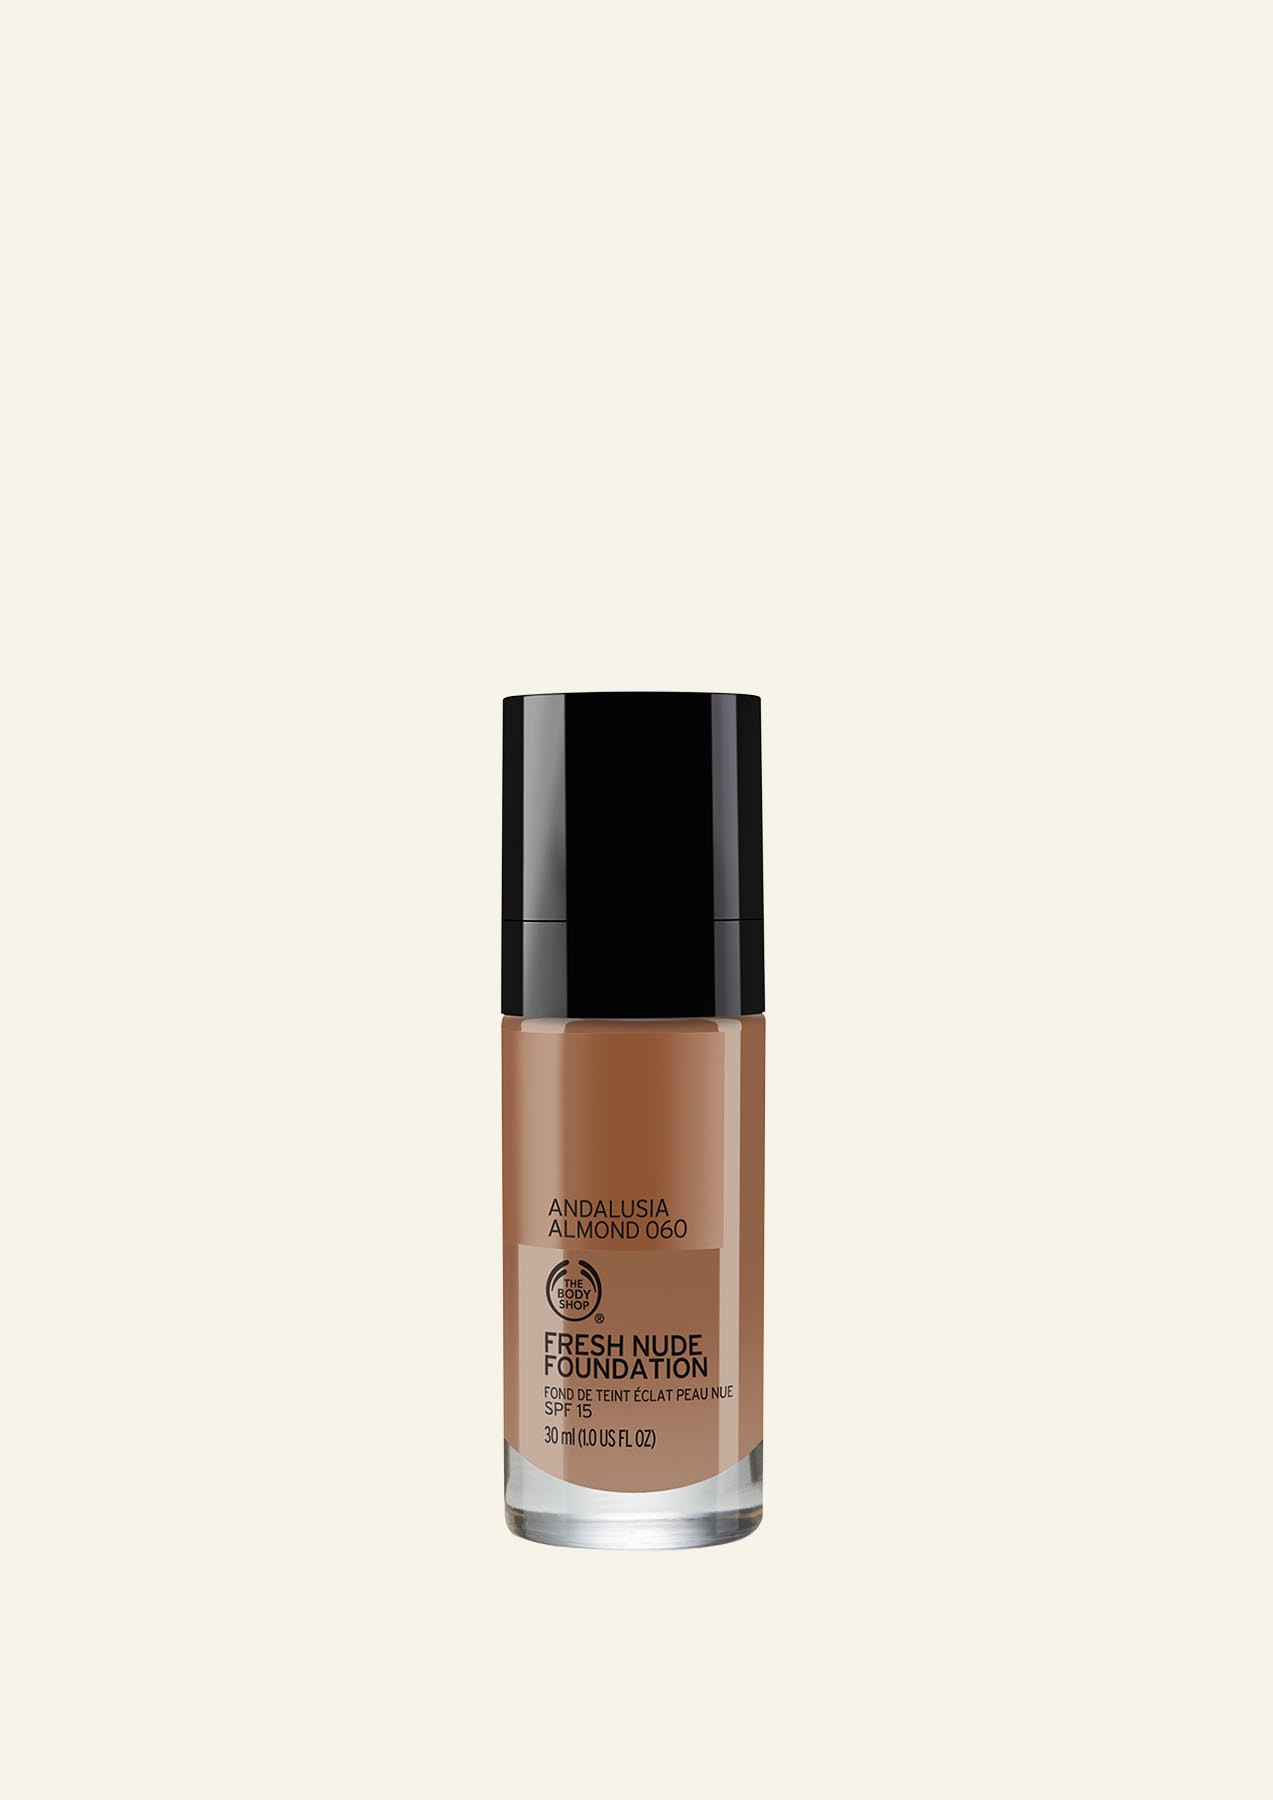 FRESH NUDE FOUNDATION ANDALUSIA ALMOND 060 30 ML